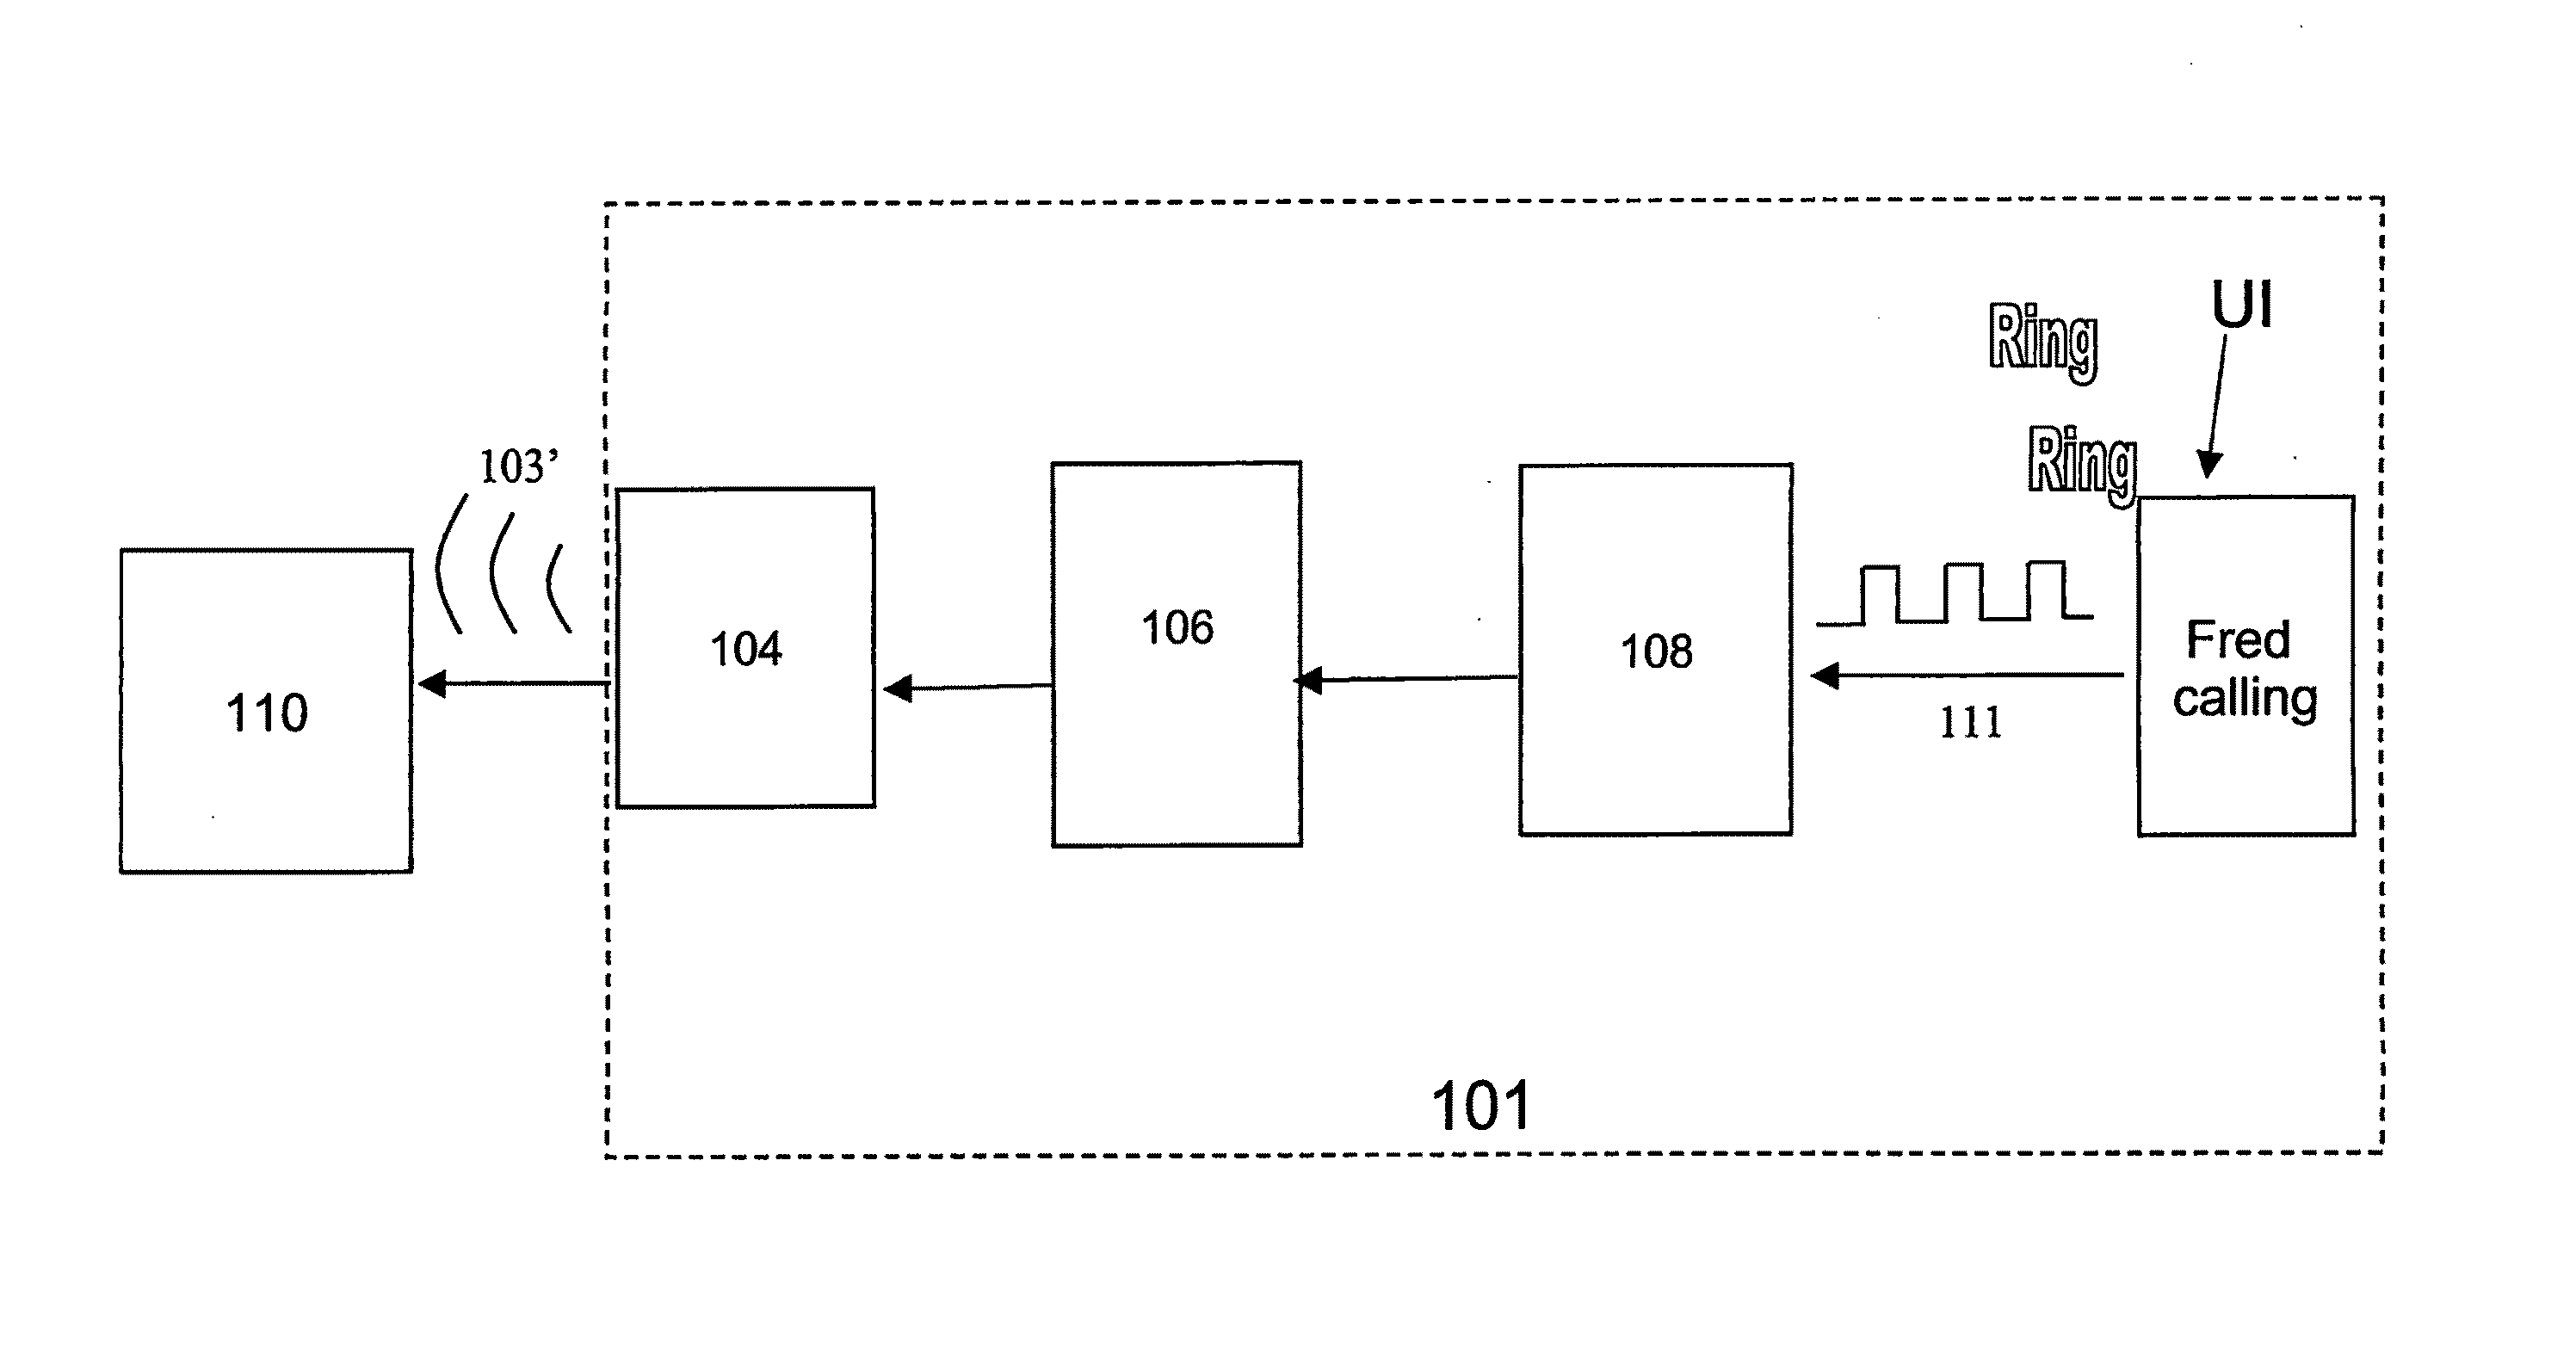 Apparatus for Detecting Body Condition